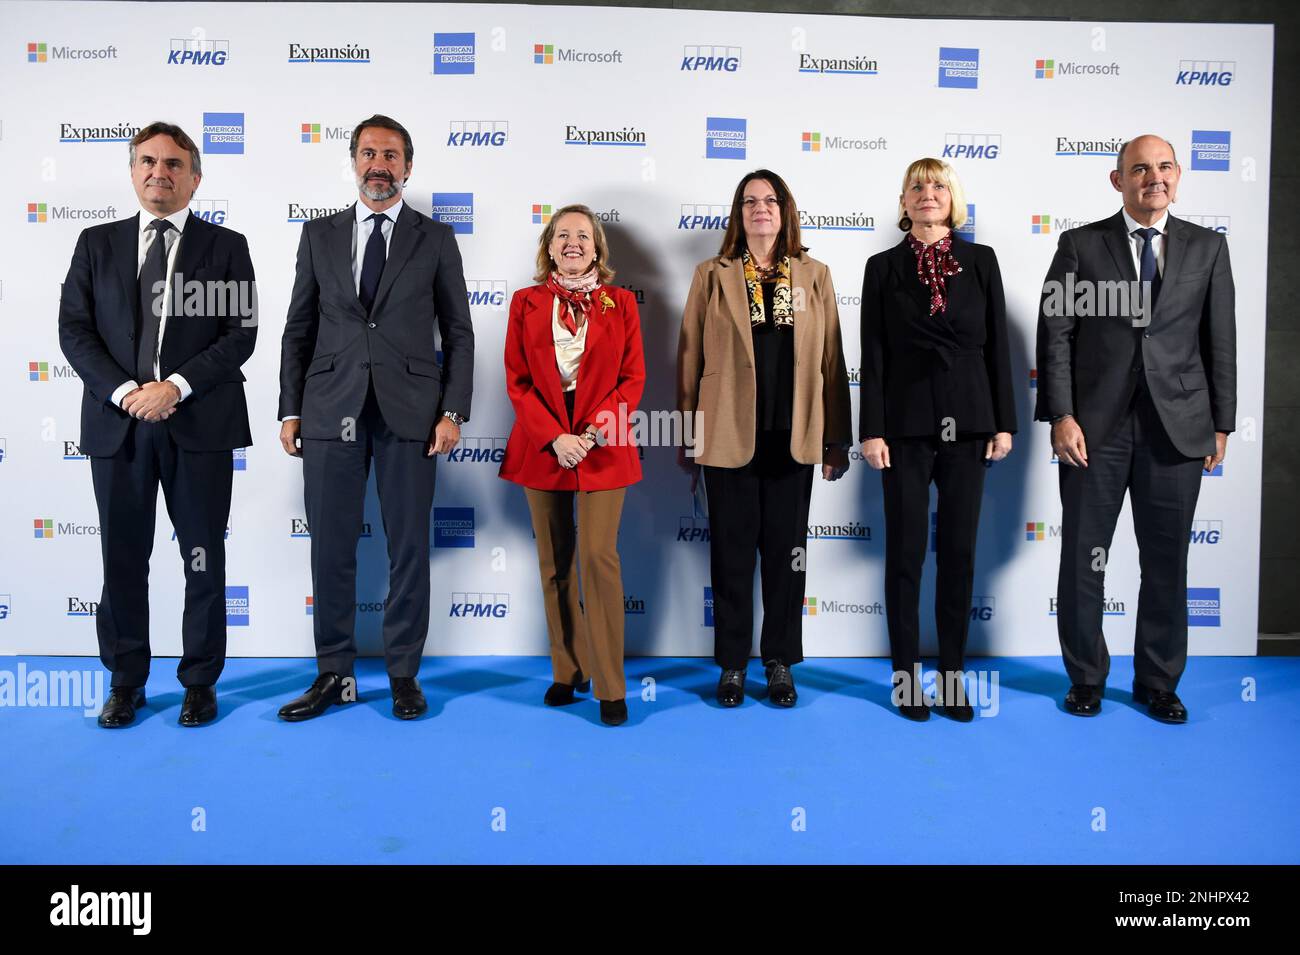 L-R) The Executive Chairman of Unidad Editorial, Marco Pompignoli, the  Chairman of KPMG Spain, Juanjo Cano, the First Vice President and Minister  of Economic Affairs and Digital Transformation, Nadia Calviño, the Director